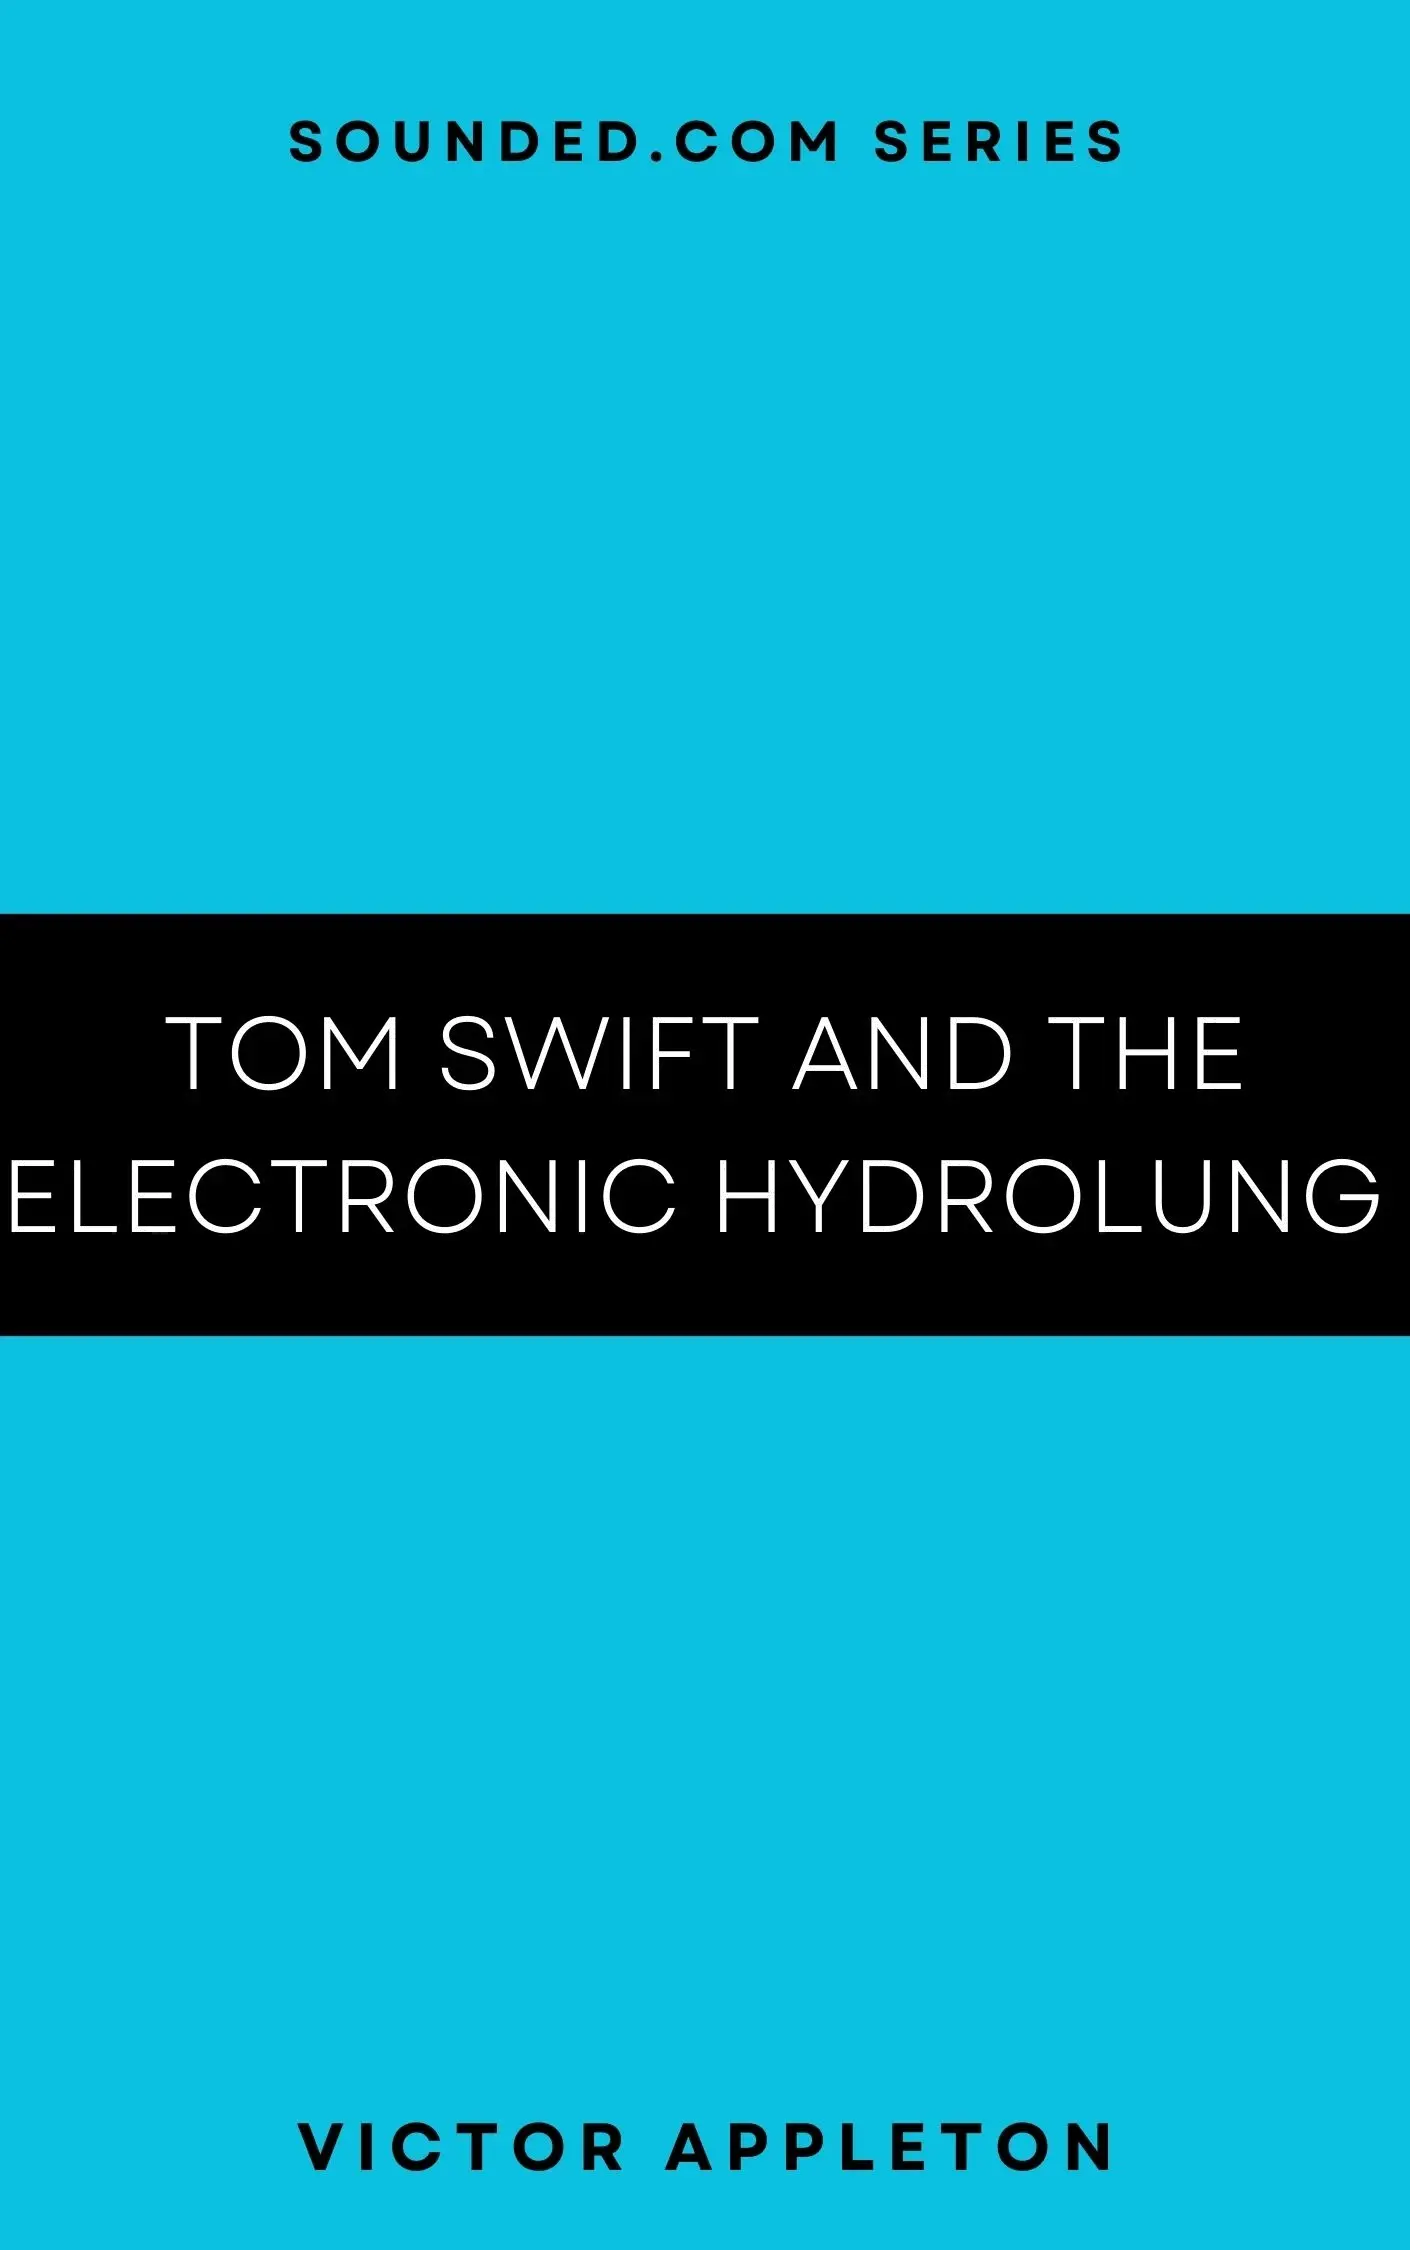 Tom Swift and the Electronic Hydrolung by Victor Appleton Audiobook